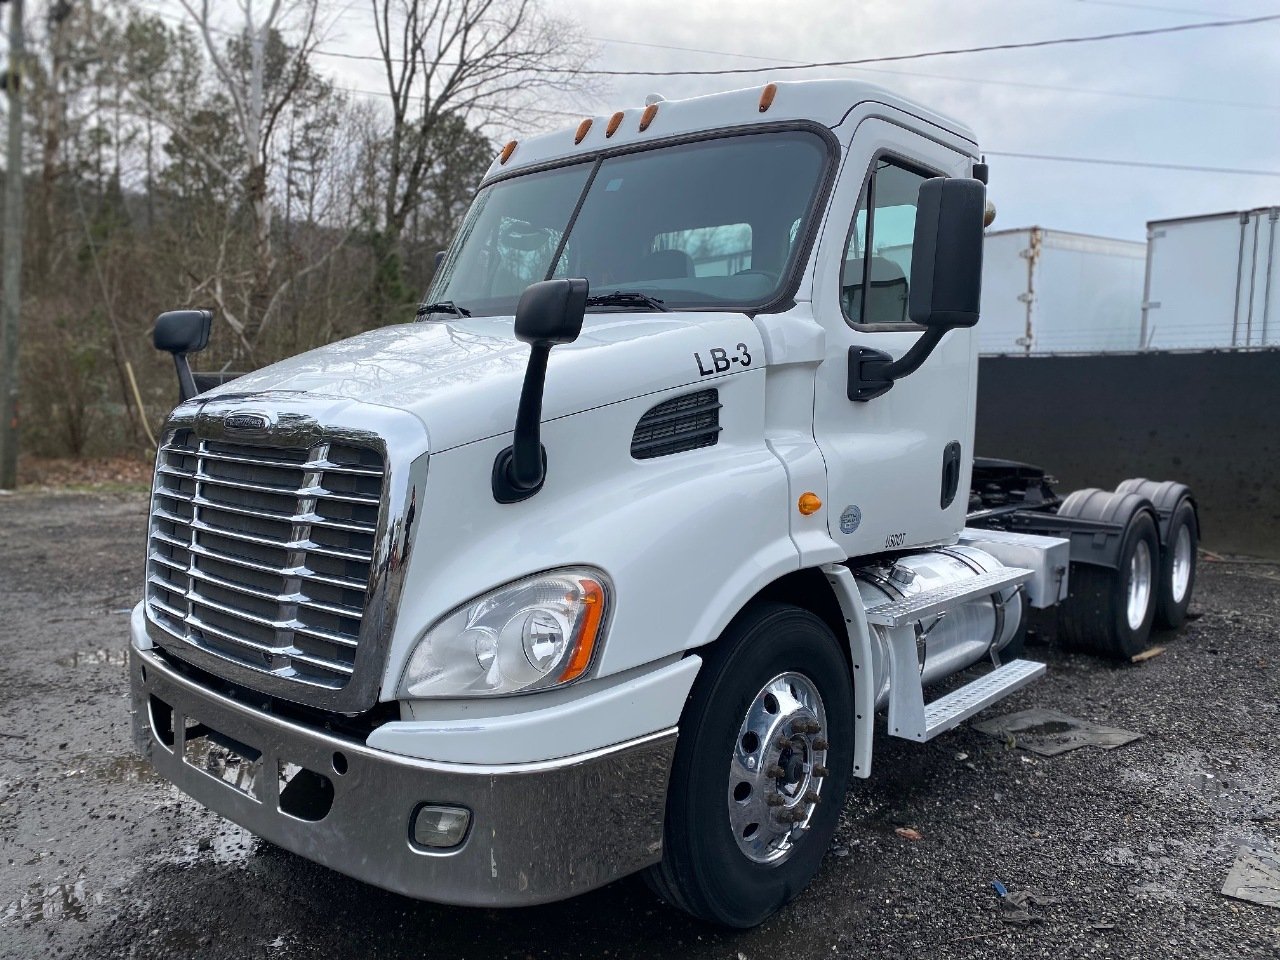 USED 2013 FREIGHTLINER CASCADIA TANDEM AXLE DAYCAB TRUCK #15100